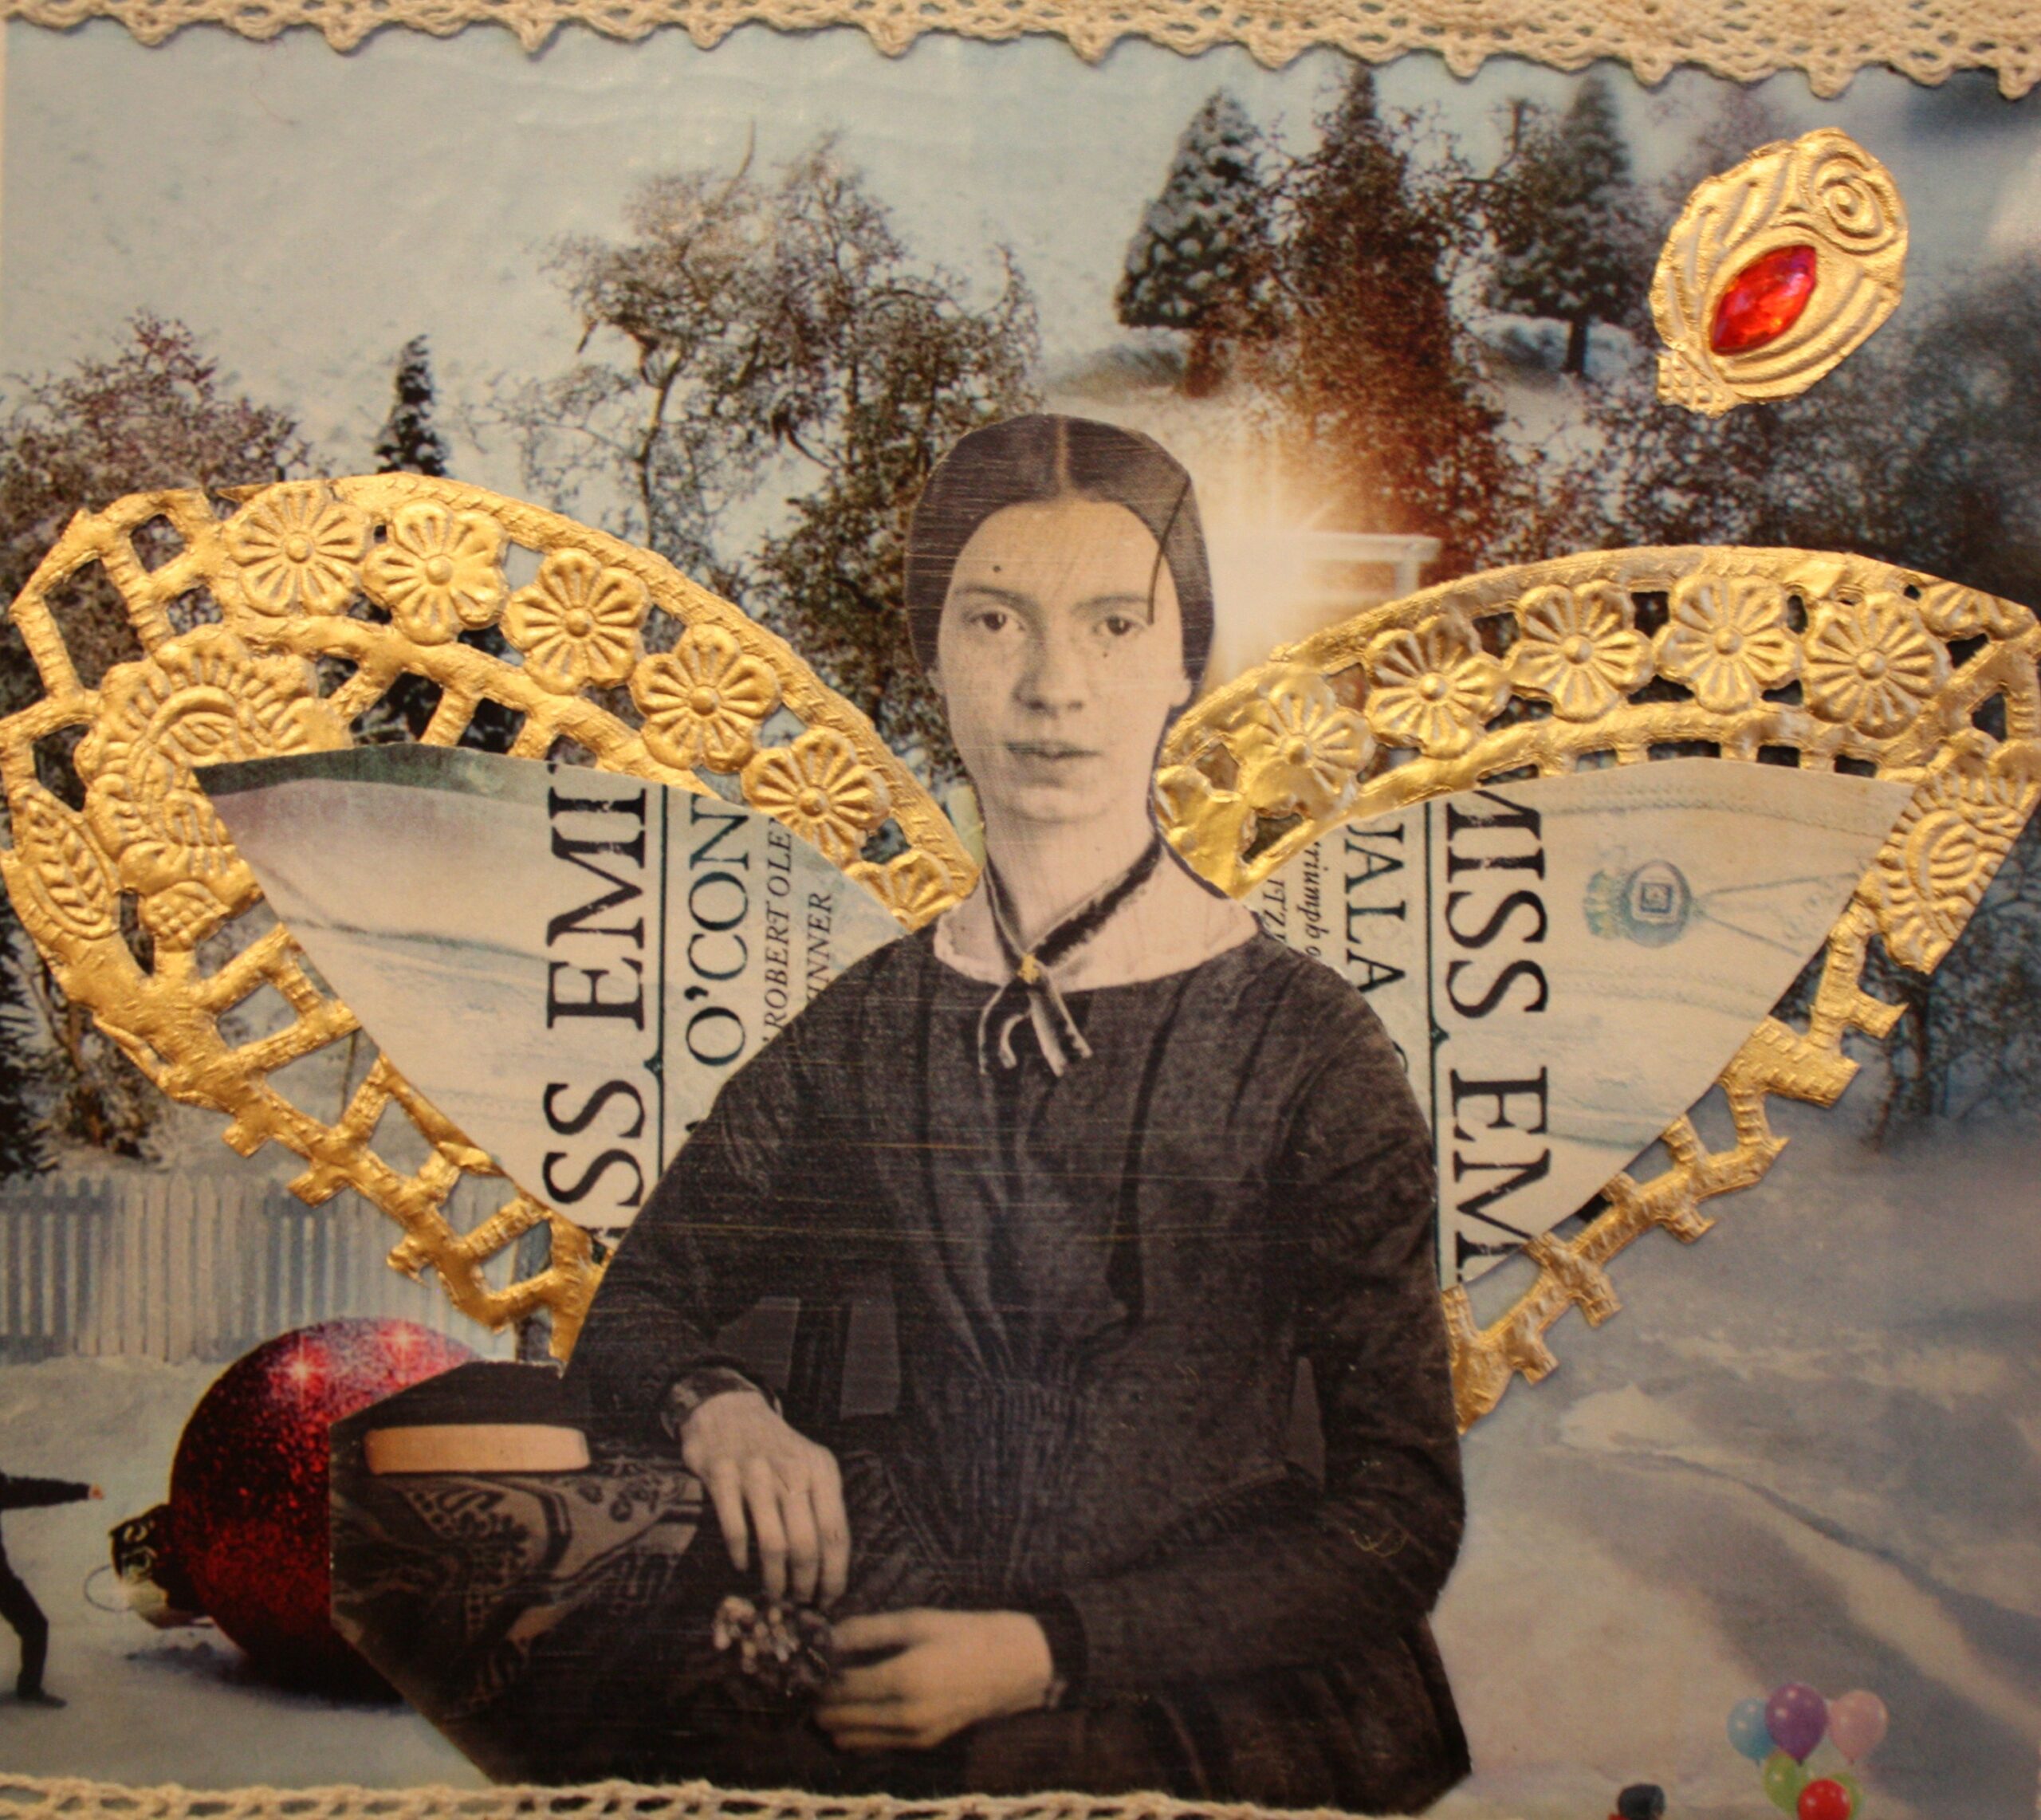 An image of Emily is collaged with music, text, a landscape of pine trees and gold edging to form wings behind her